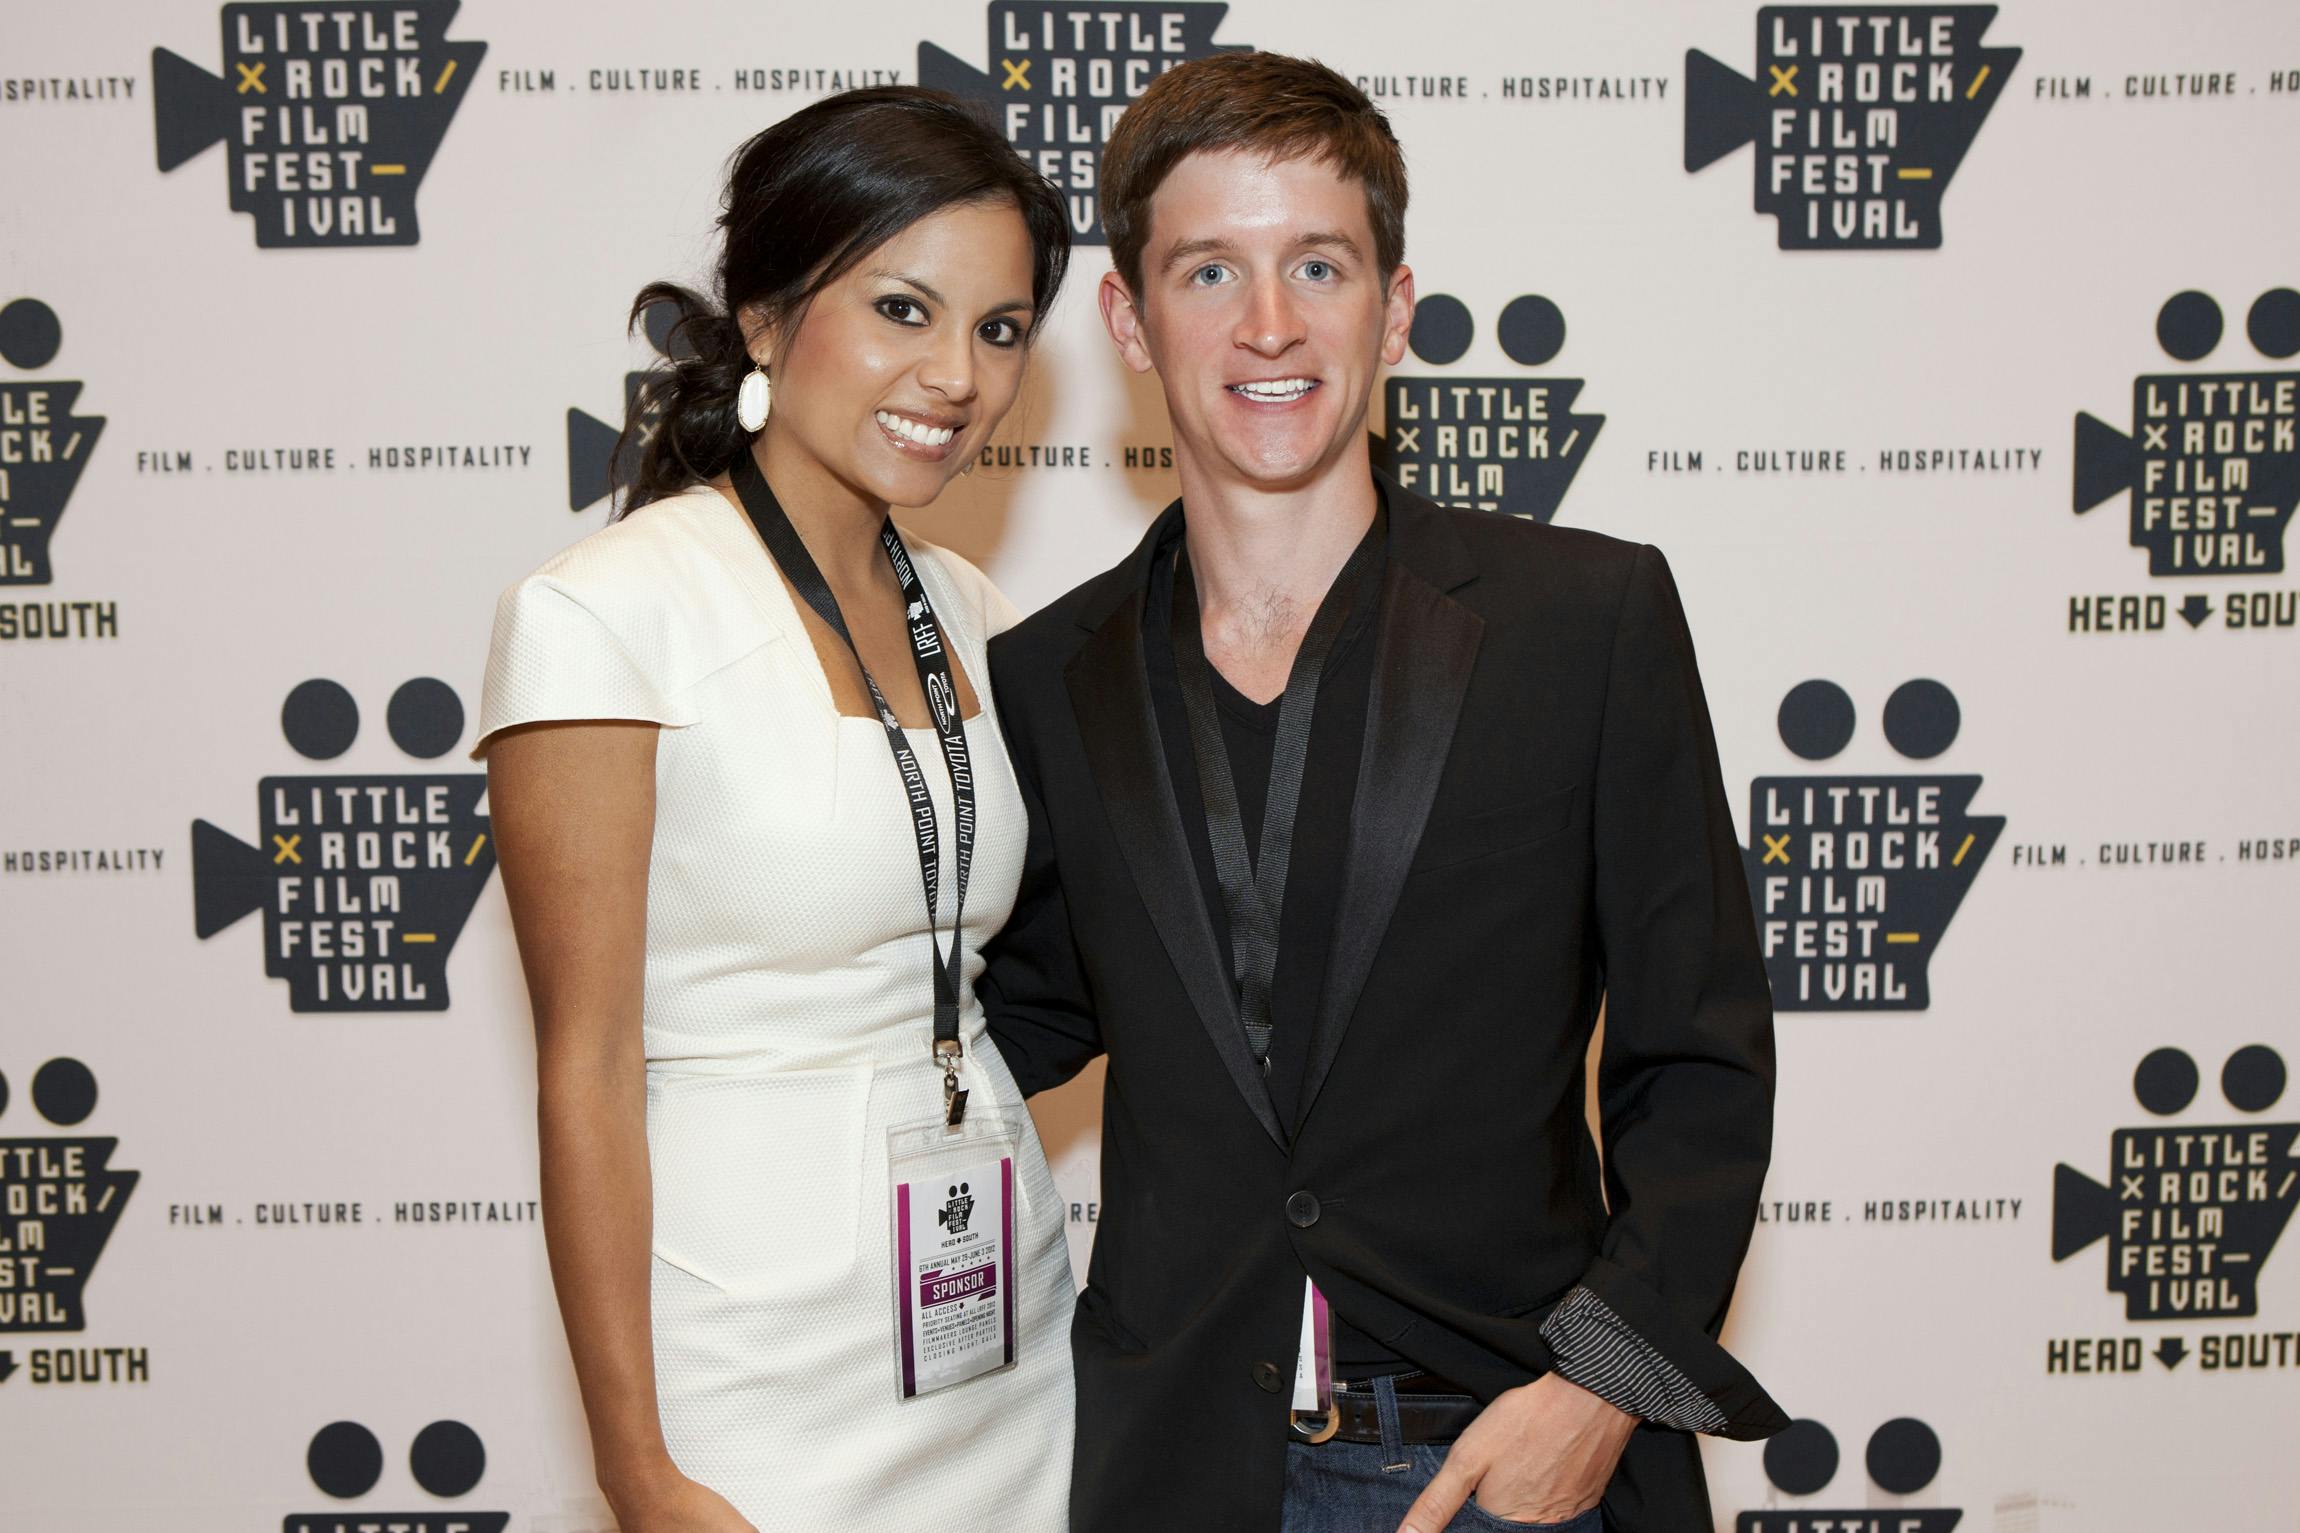 My late wife and me at the LRFF (June 3, 2012)